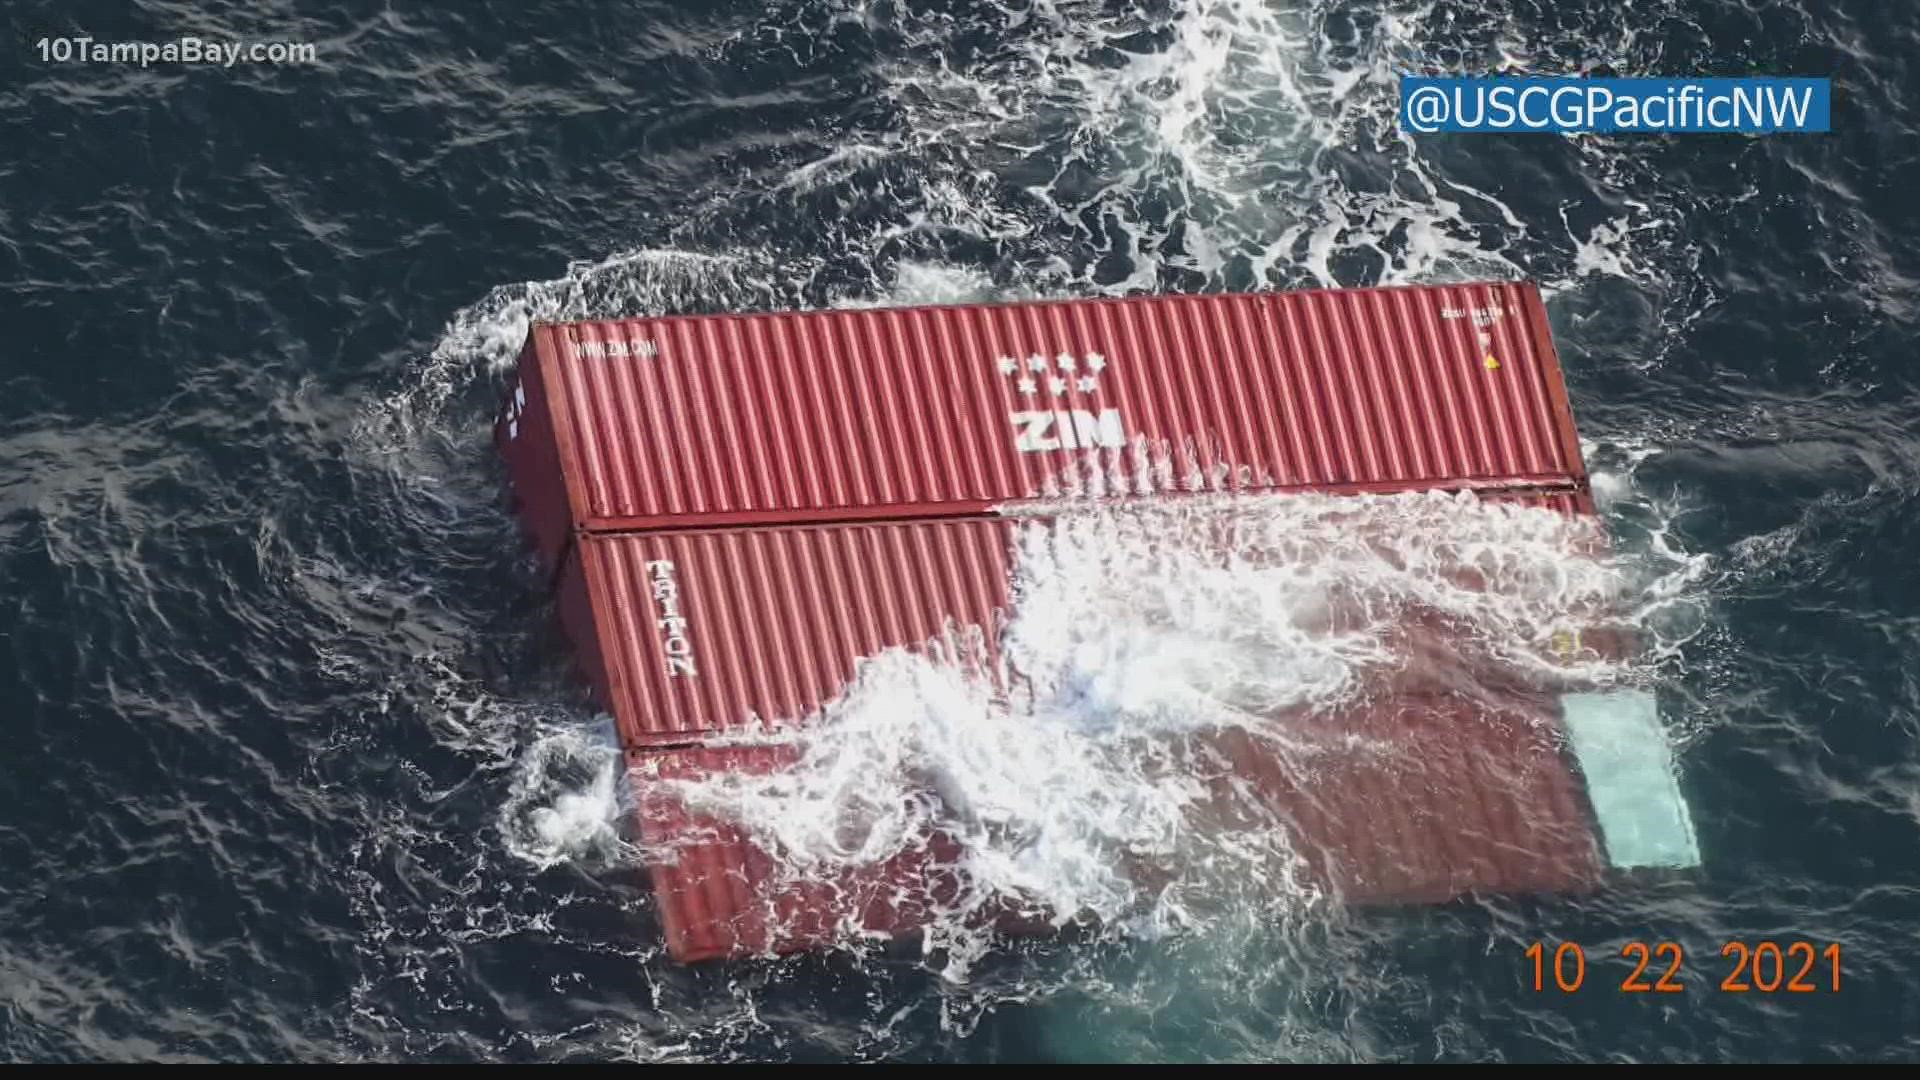 Forty containers were lost off a vessel when it listed in rough waters, according to the Coast Guard. Eight of the containers have been found floating.